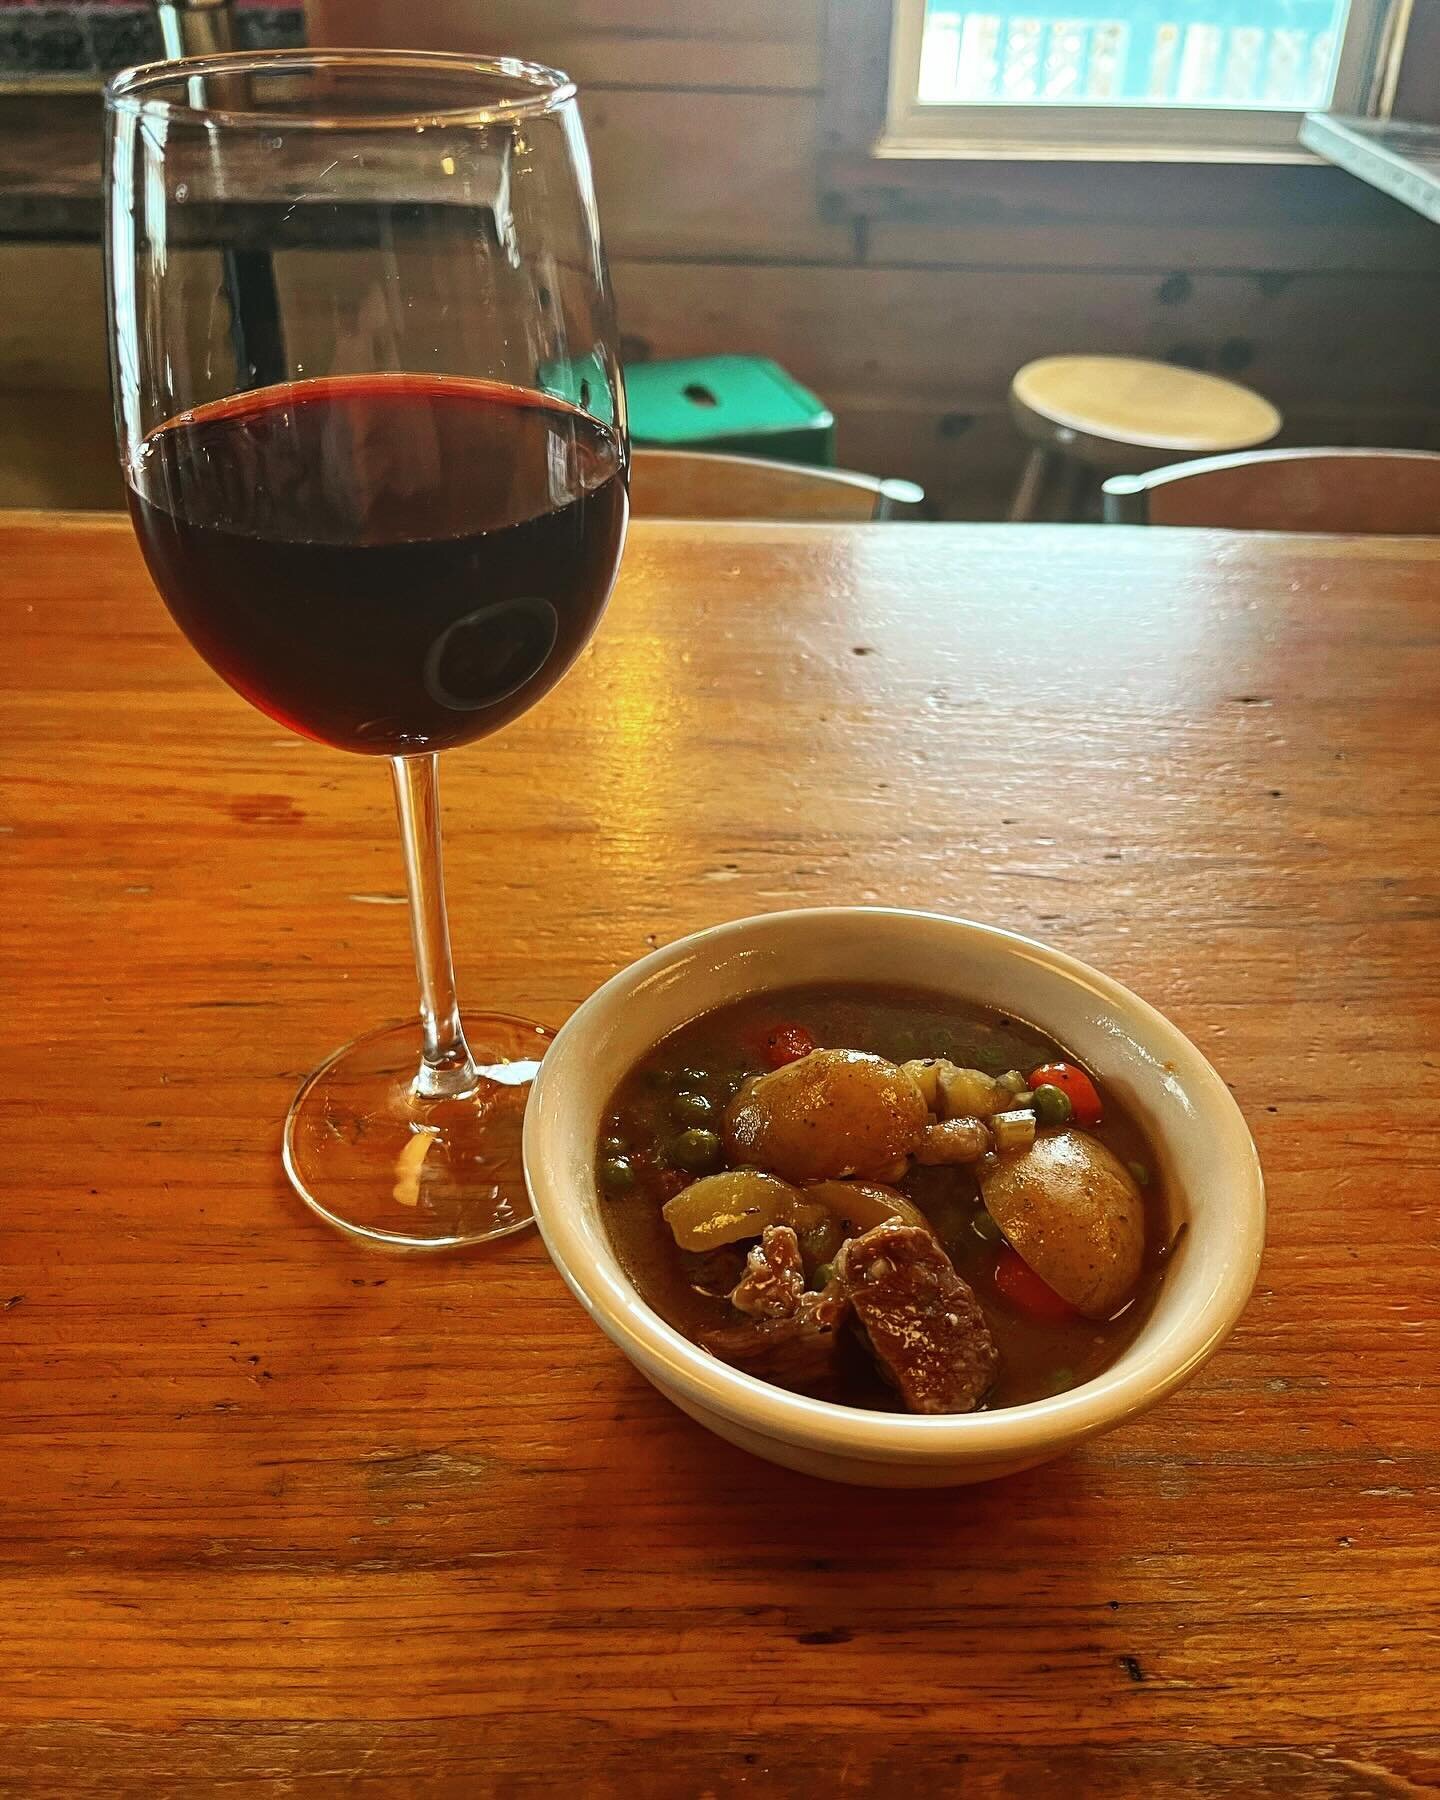 It&rsquo;s cold outside but it gets so hot in here. Come on in and warm up with a bowl of Robin&rsquo;s hearty beef stew and a glass of vino. We&rsquo;re here until 8 pm. #beefstew #warmup #kickback